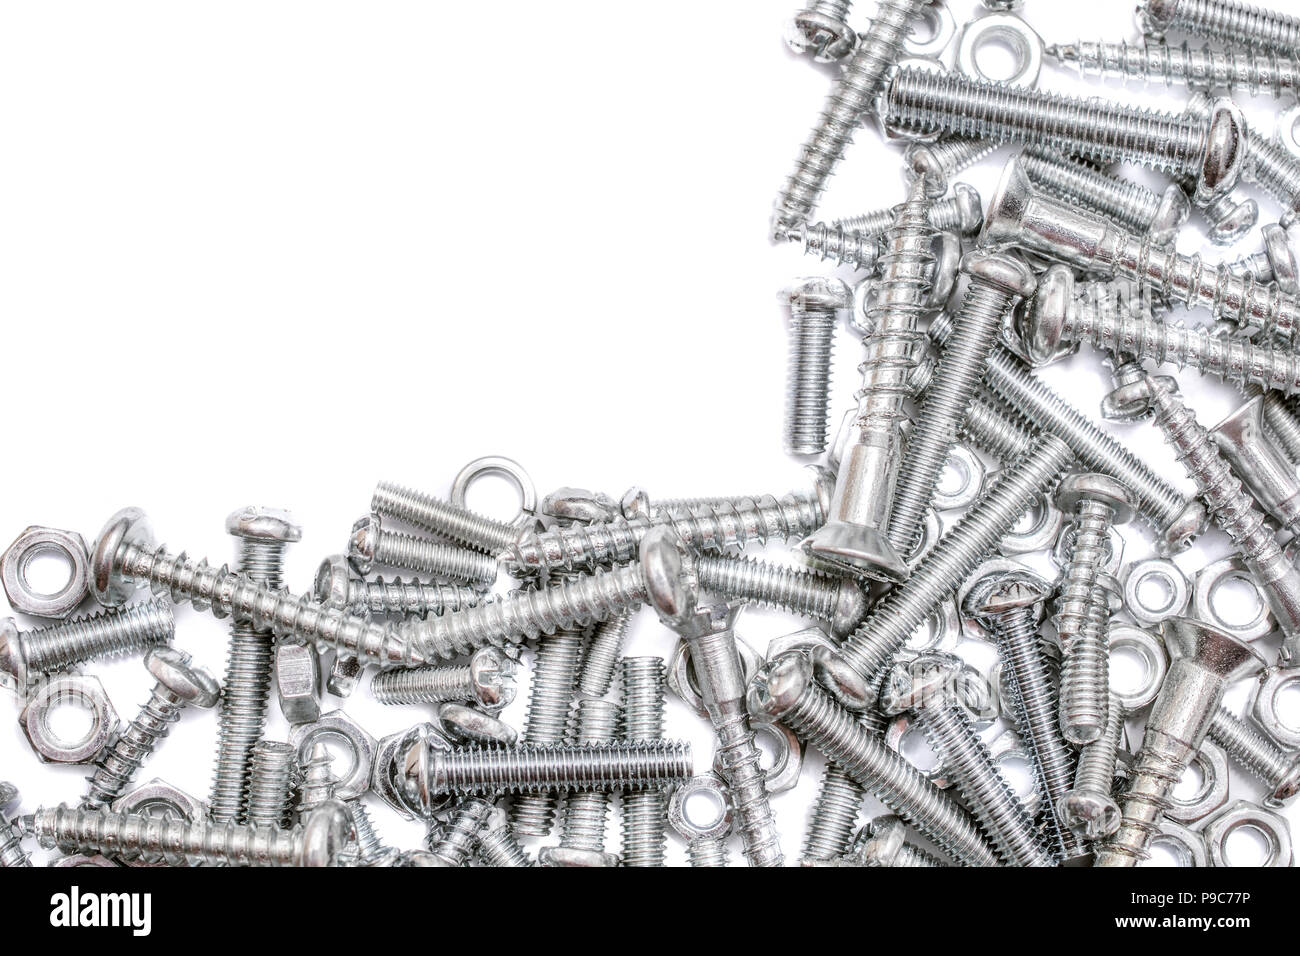 Big Collection Of Iron Screws, Wood Screws and Bolts With A Free Rectangle For Text In The Upper Left Corner Stock Photo